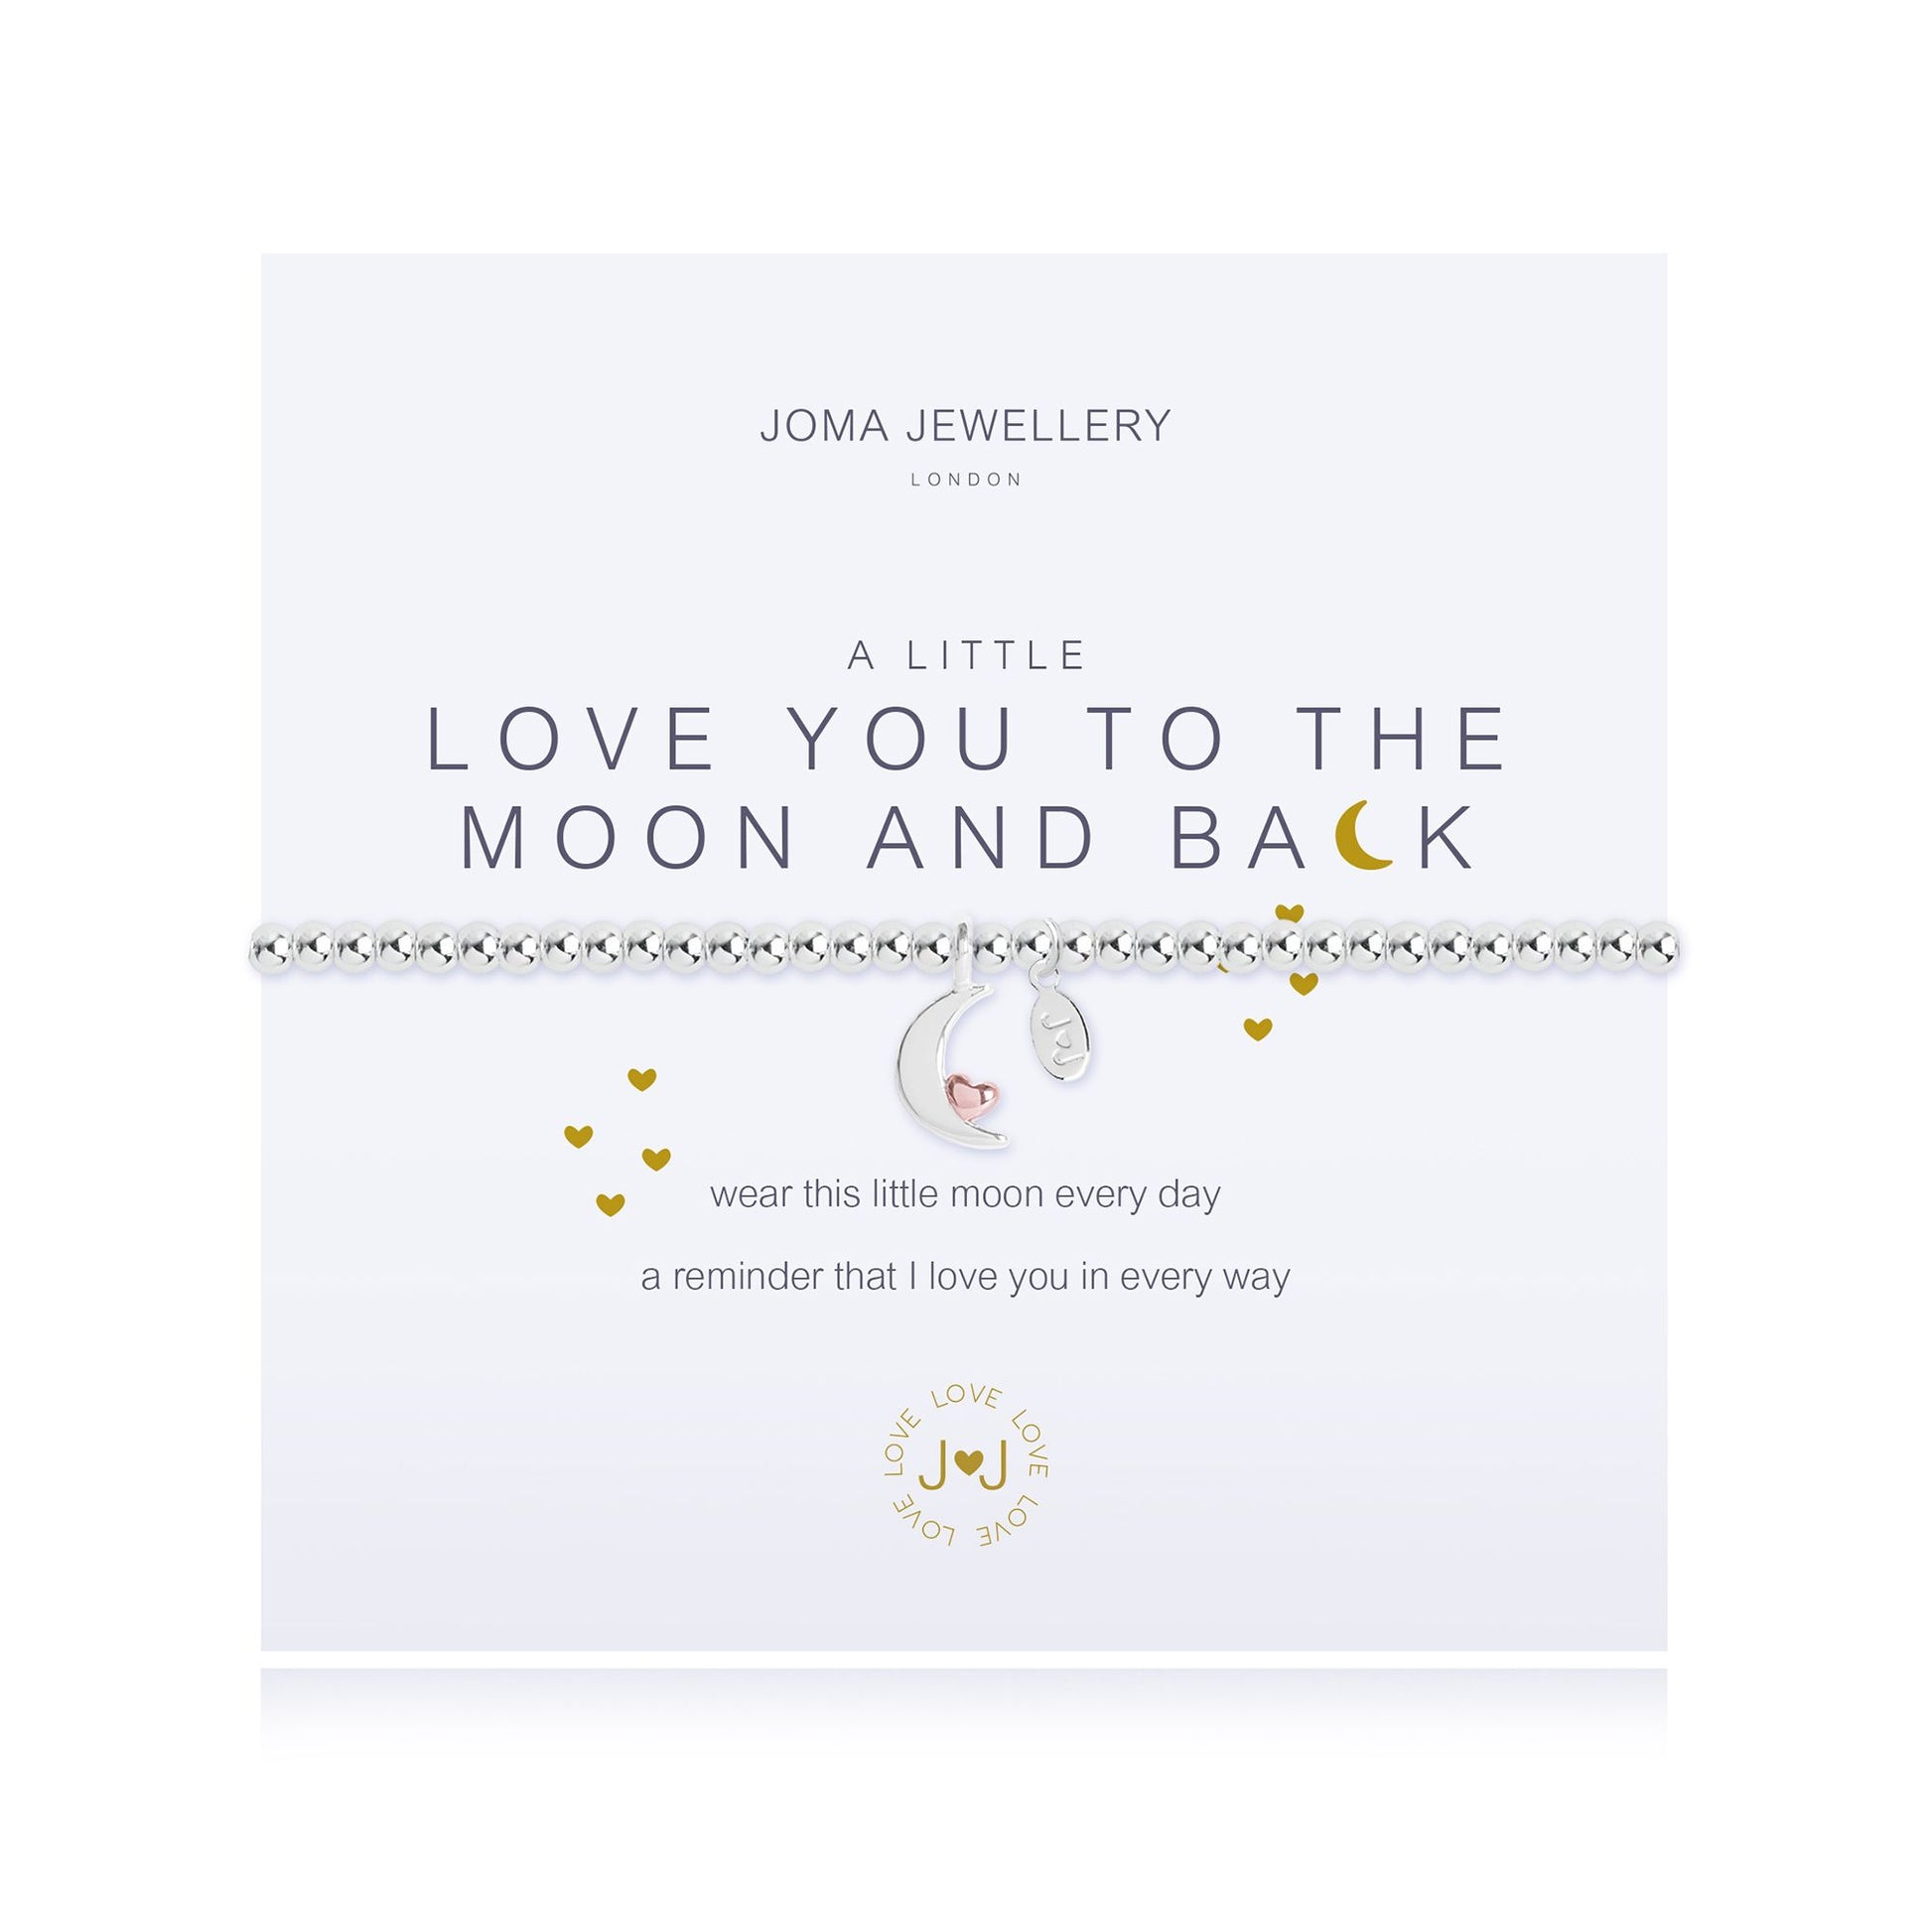 Joma Jewellery 'A Little Love You To The Moon And Back' Bracelet